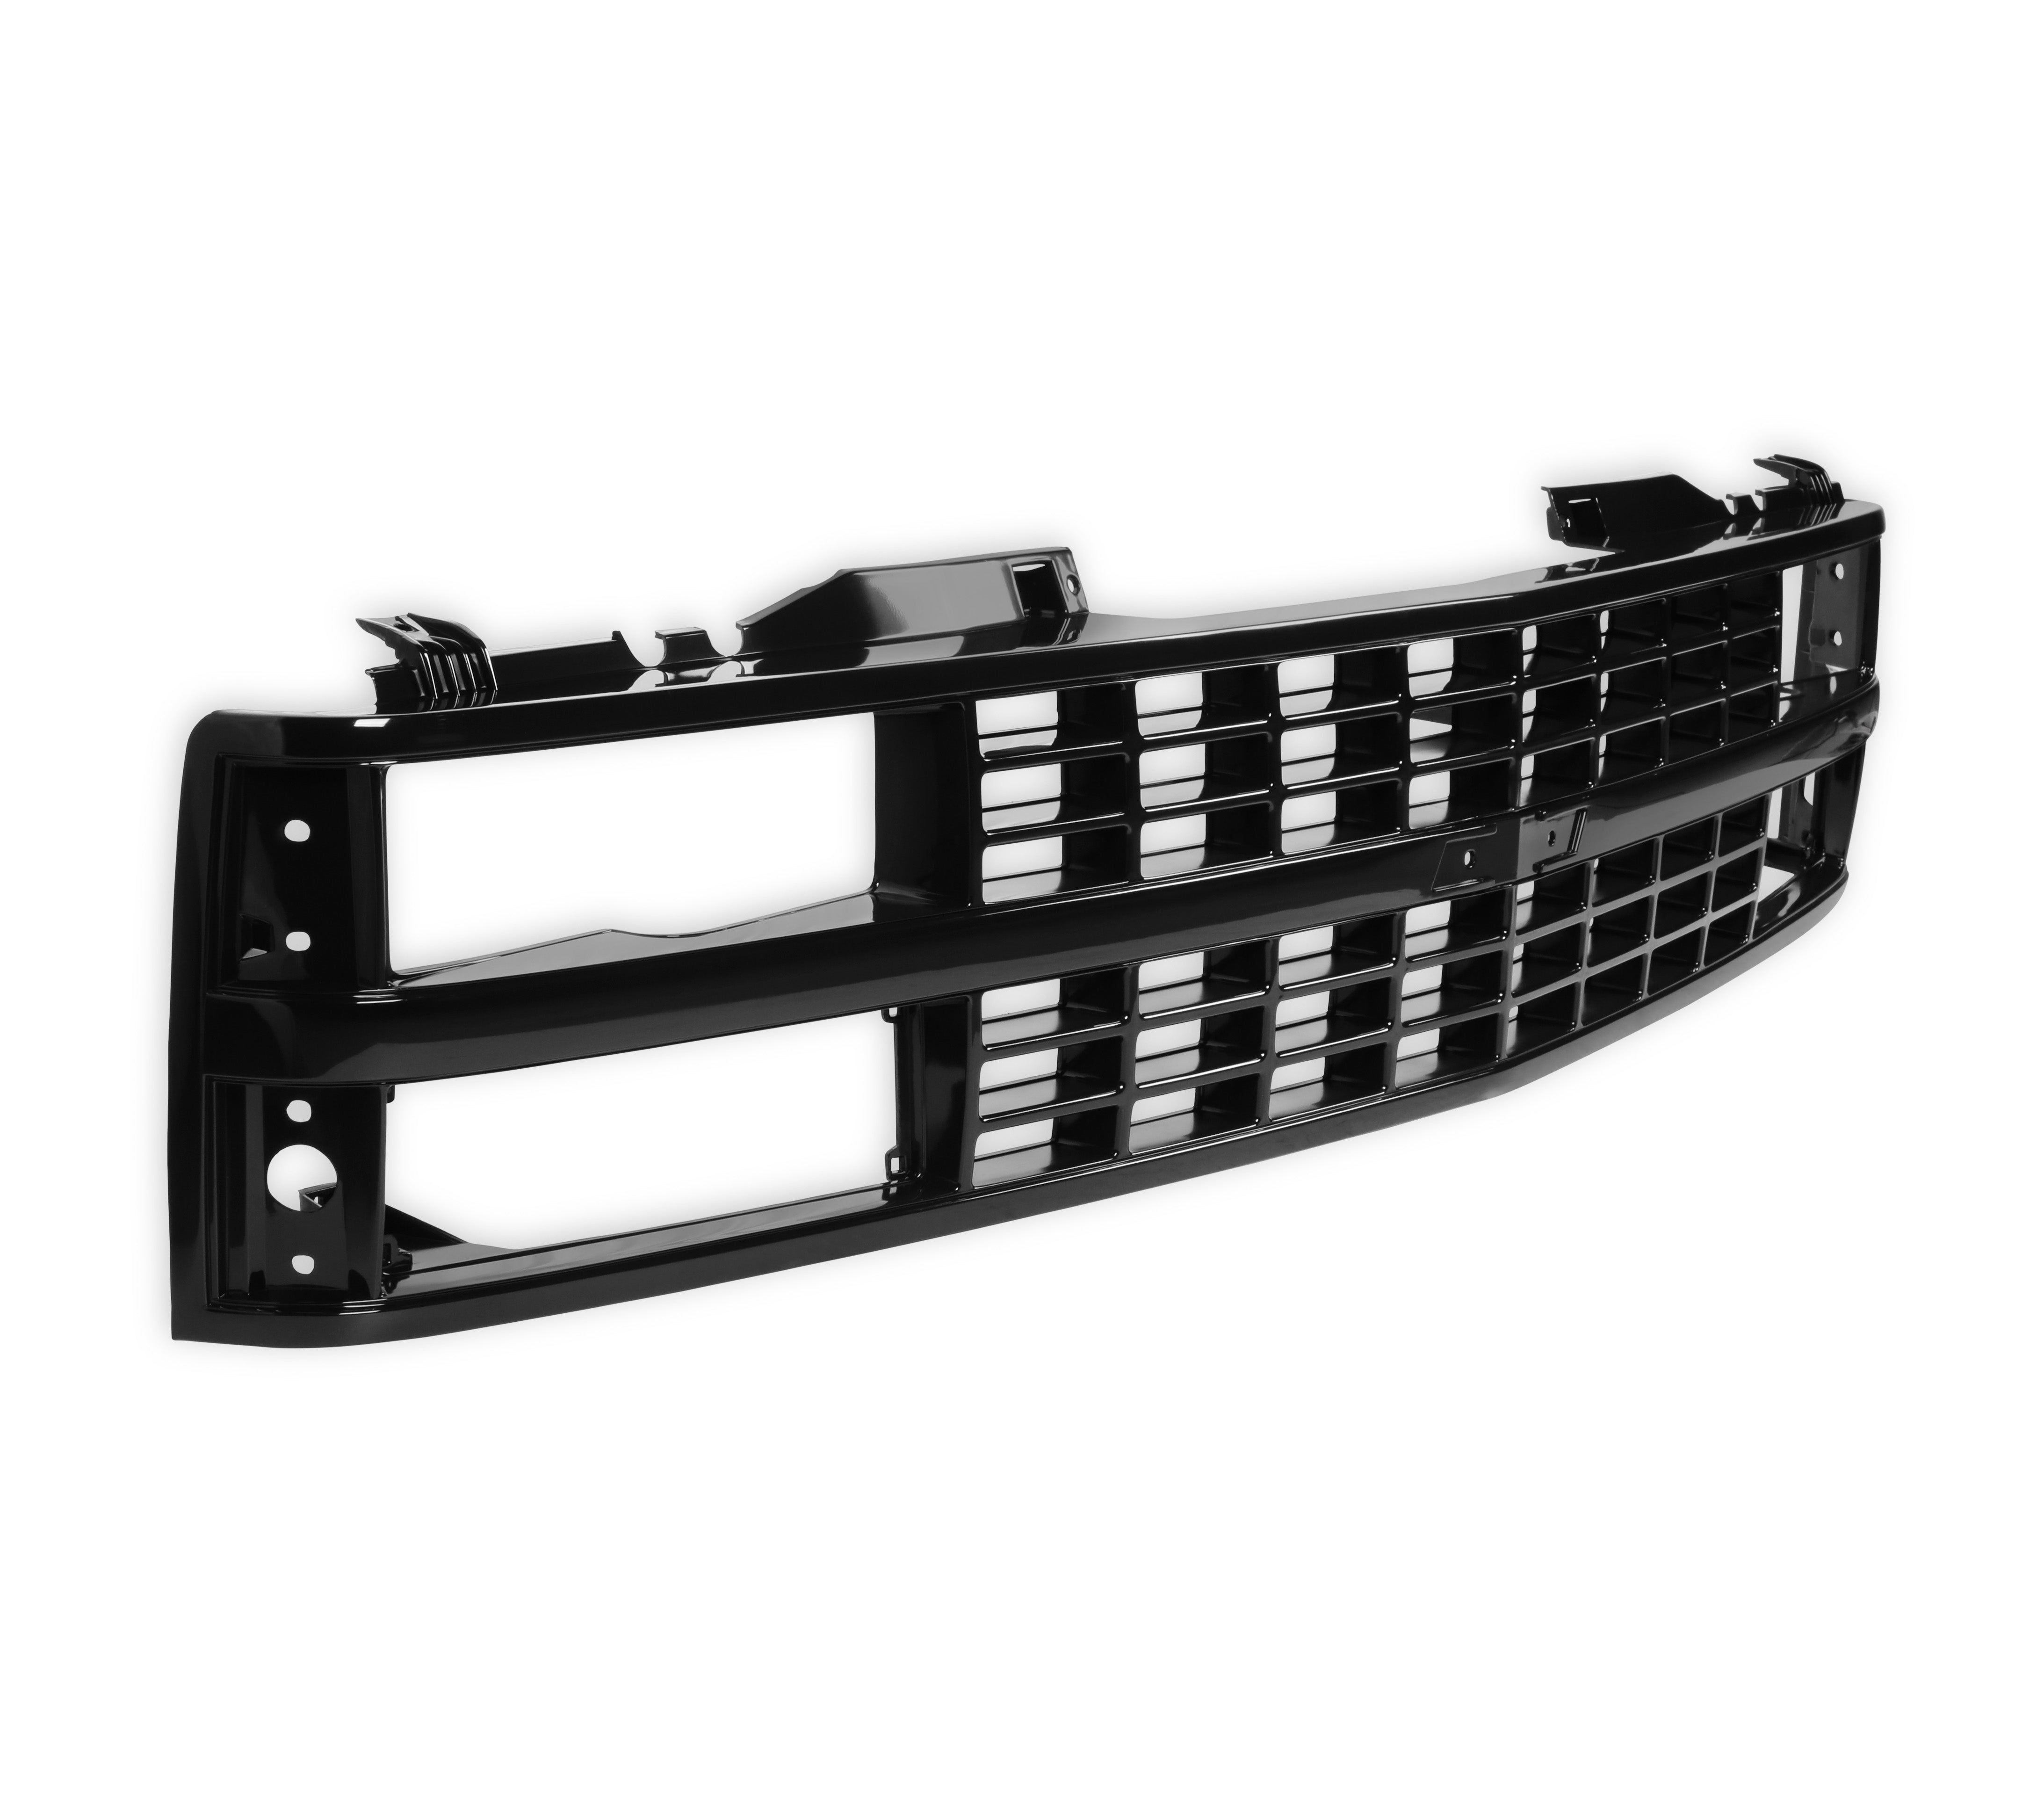 BROTHERS GMT400 Chevy Grille - Dual Headlight - Black pn 04-365